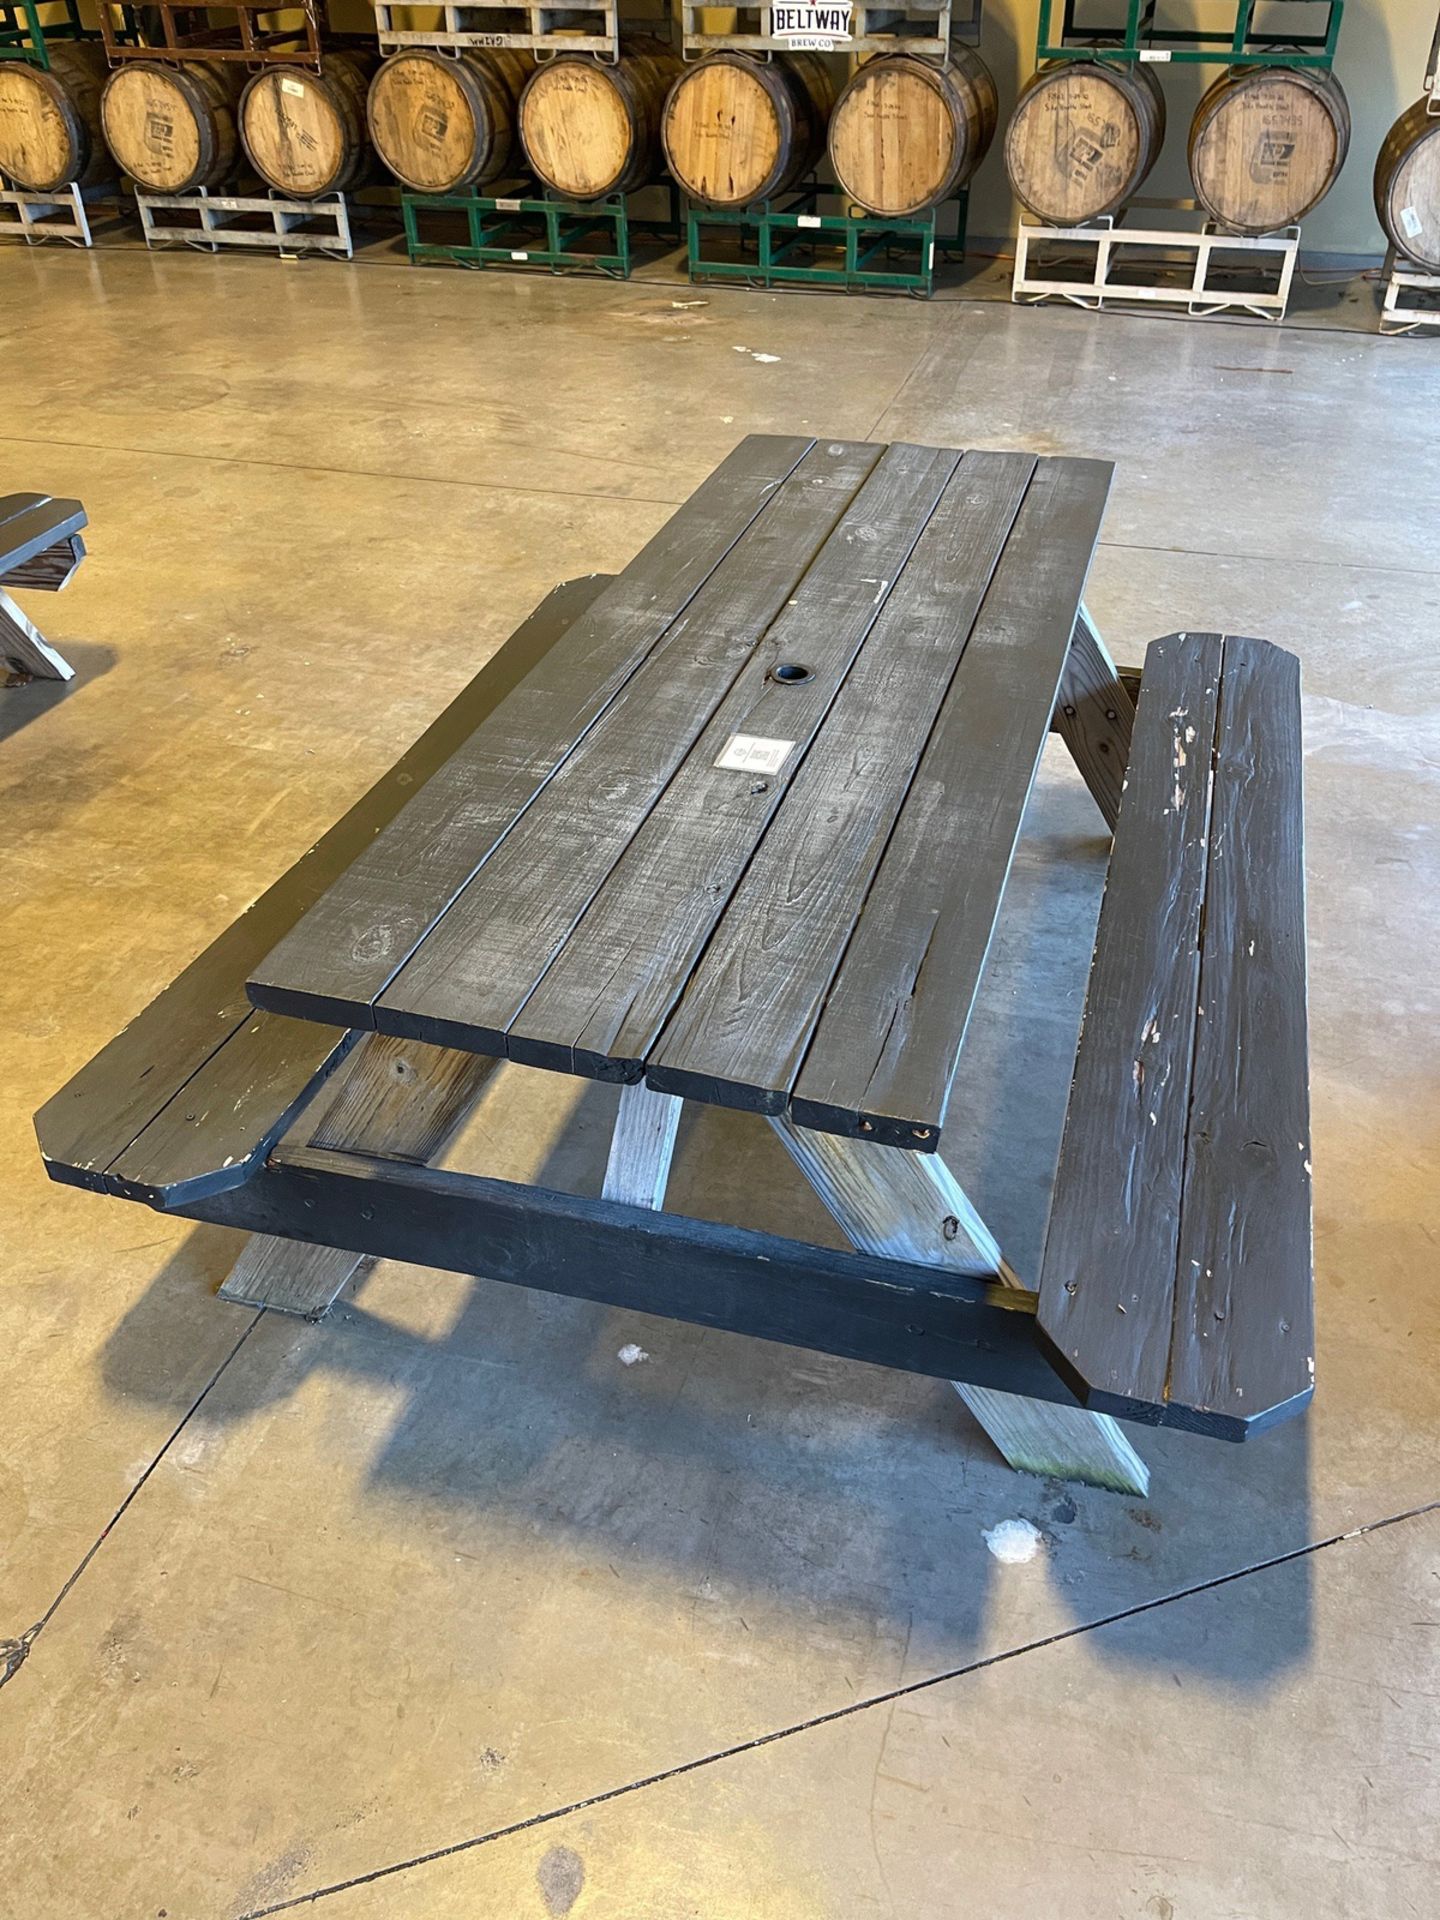 Lot of (3) Wooden Picnic Tables - Approx. 28"" x 72"" | Rig Fee $75